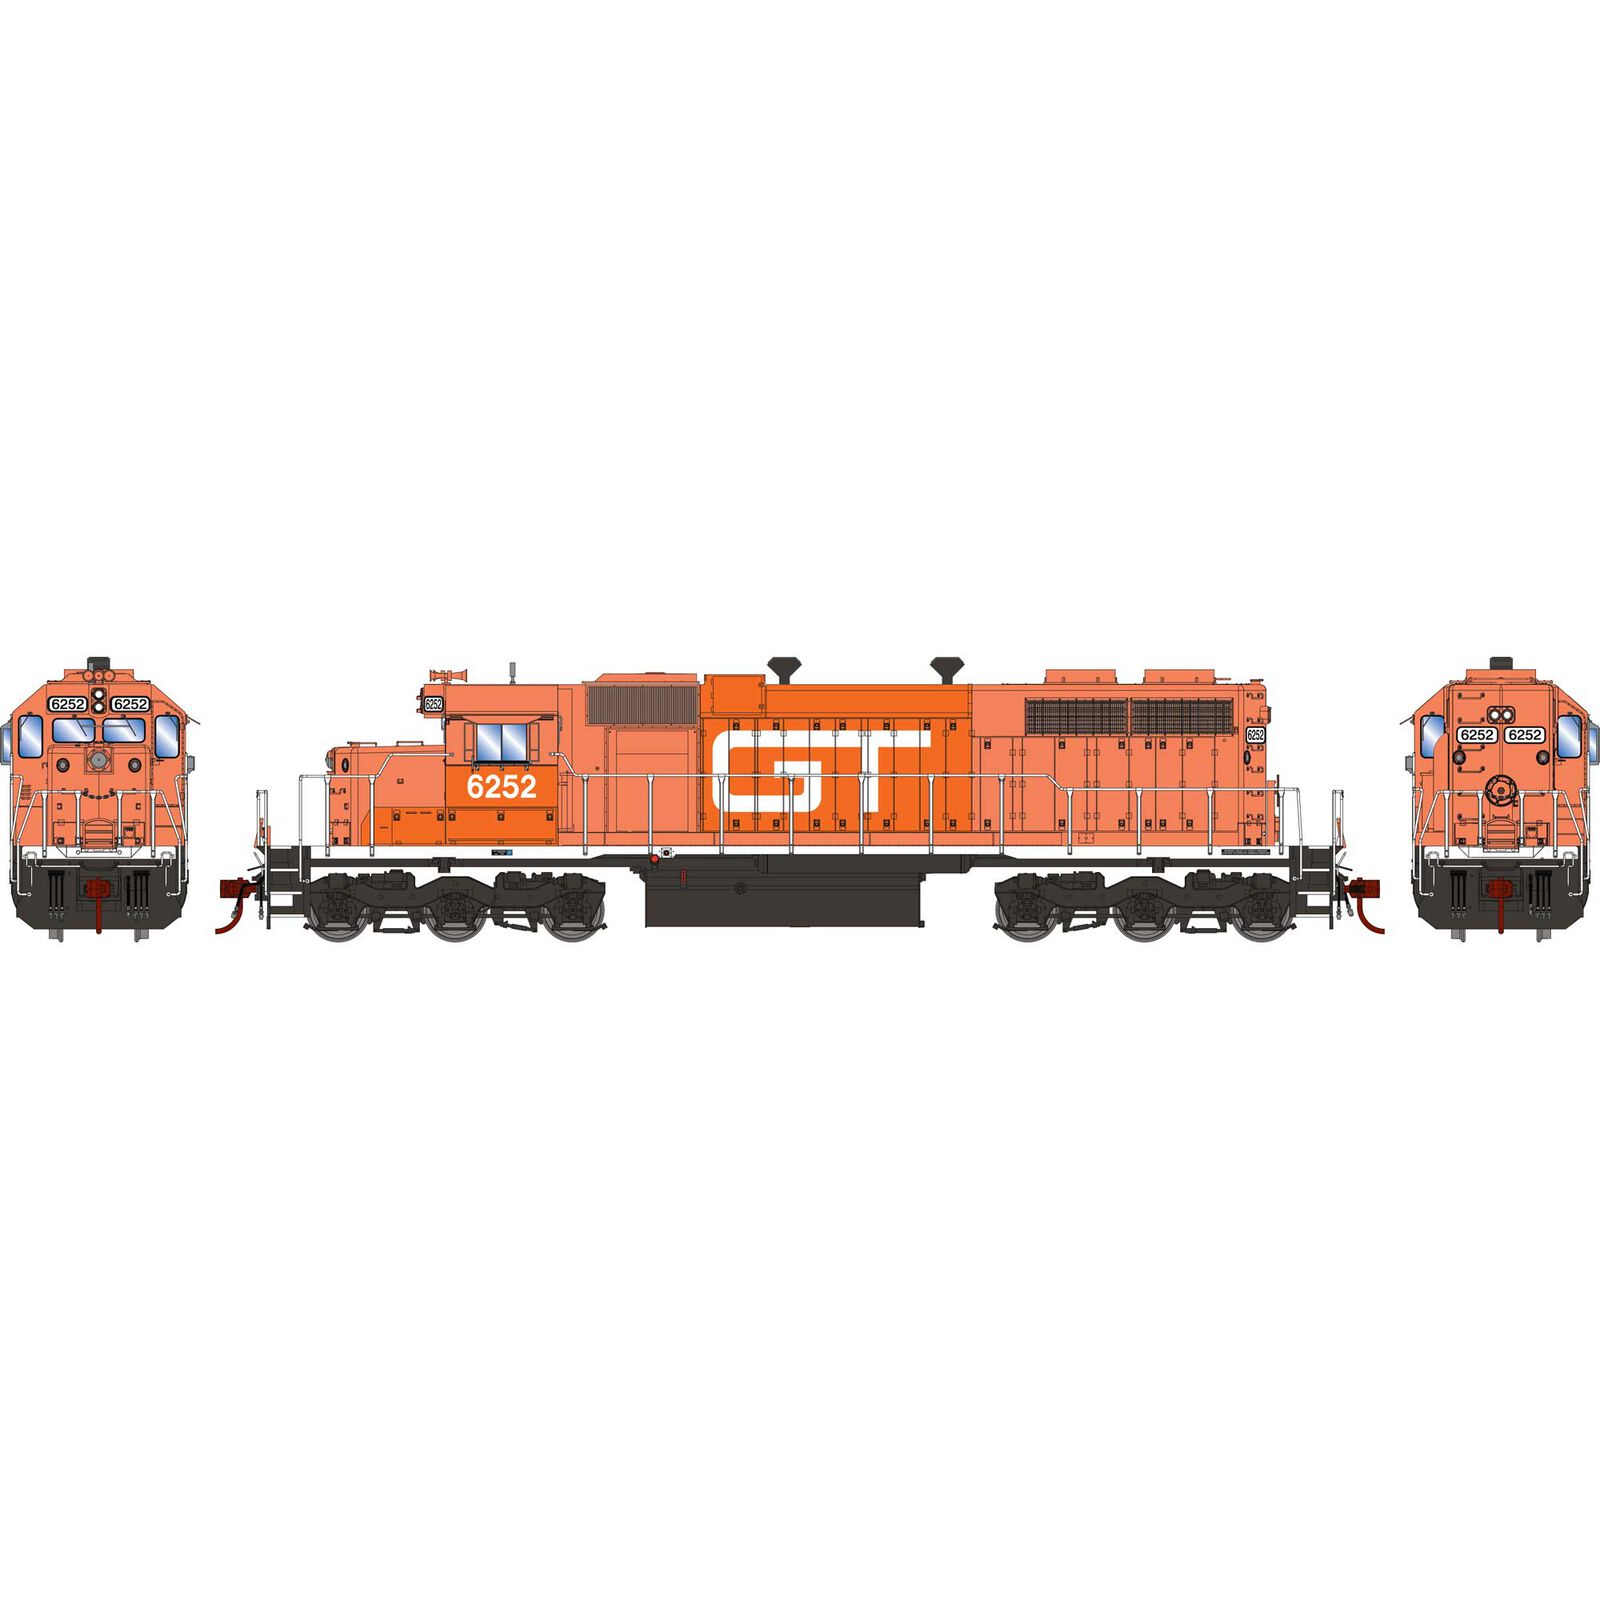 HO RTR SD38, GTW #6252